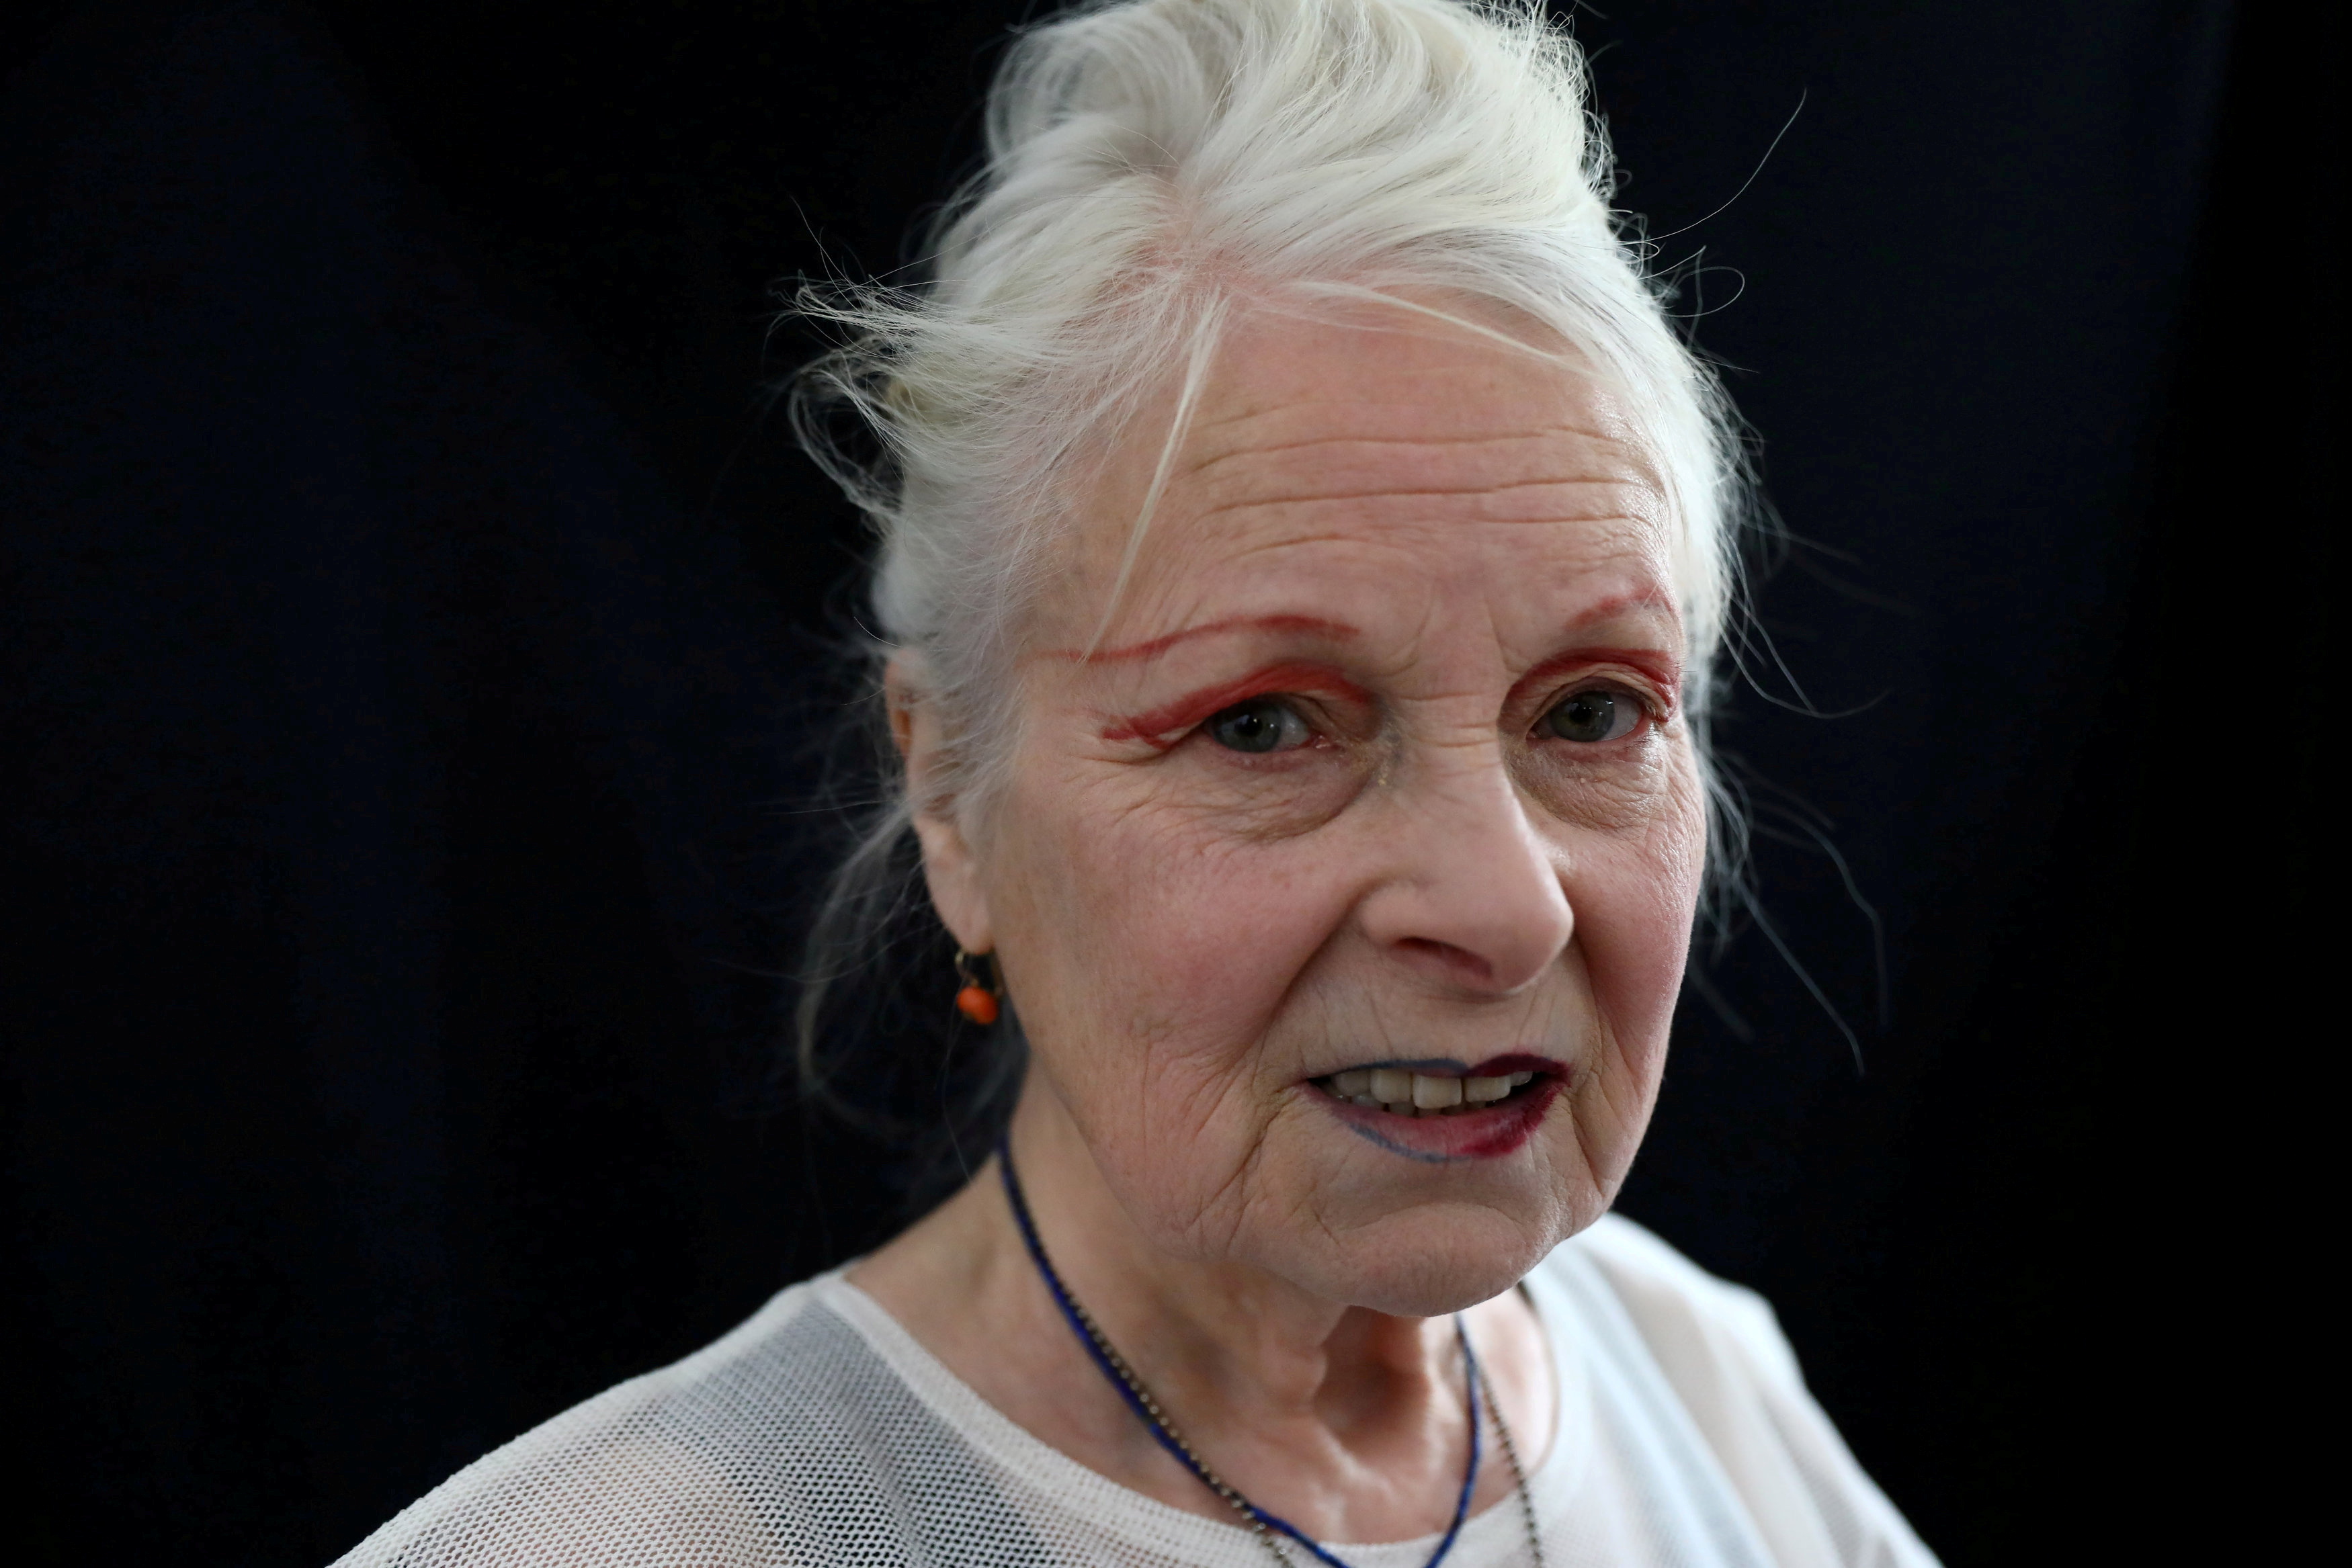 Designer Vivienne Westwood shares her 'Letter to Earth' ahead of COP26 ...